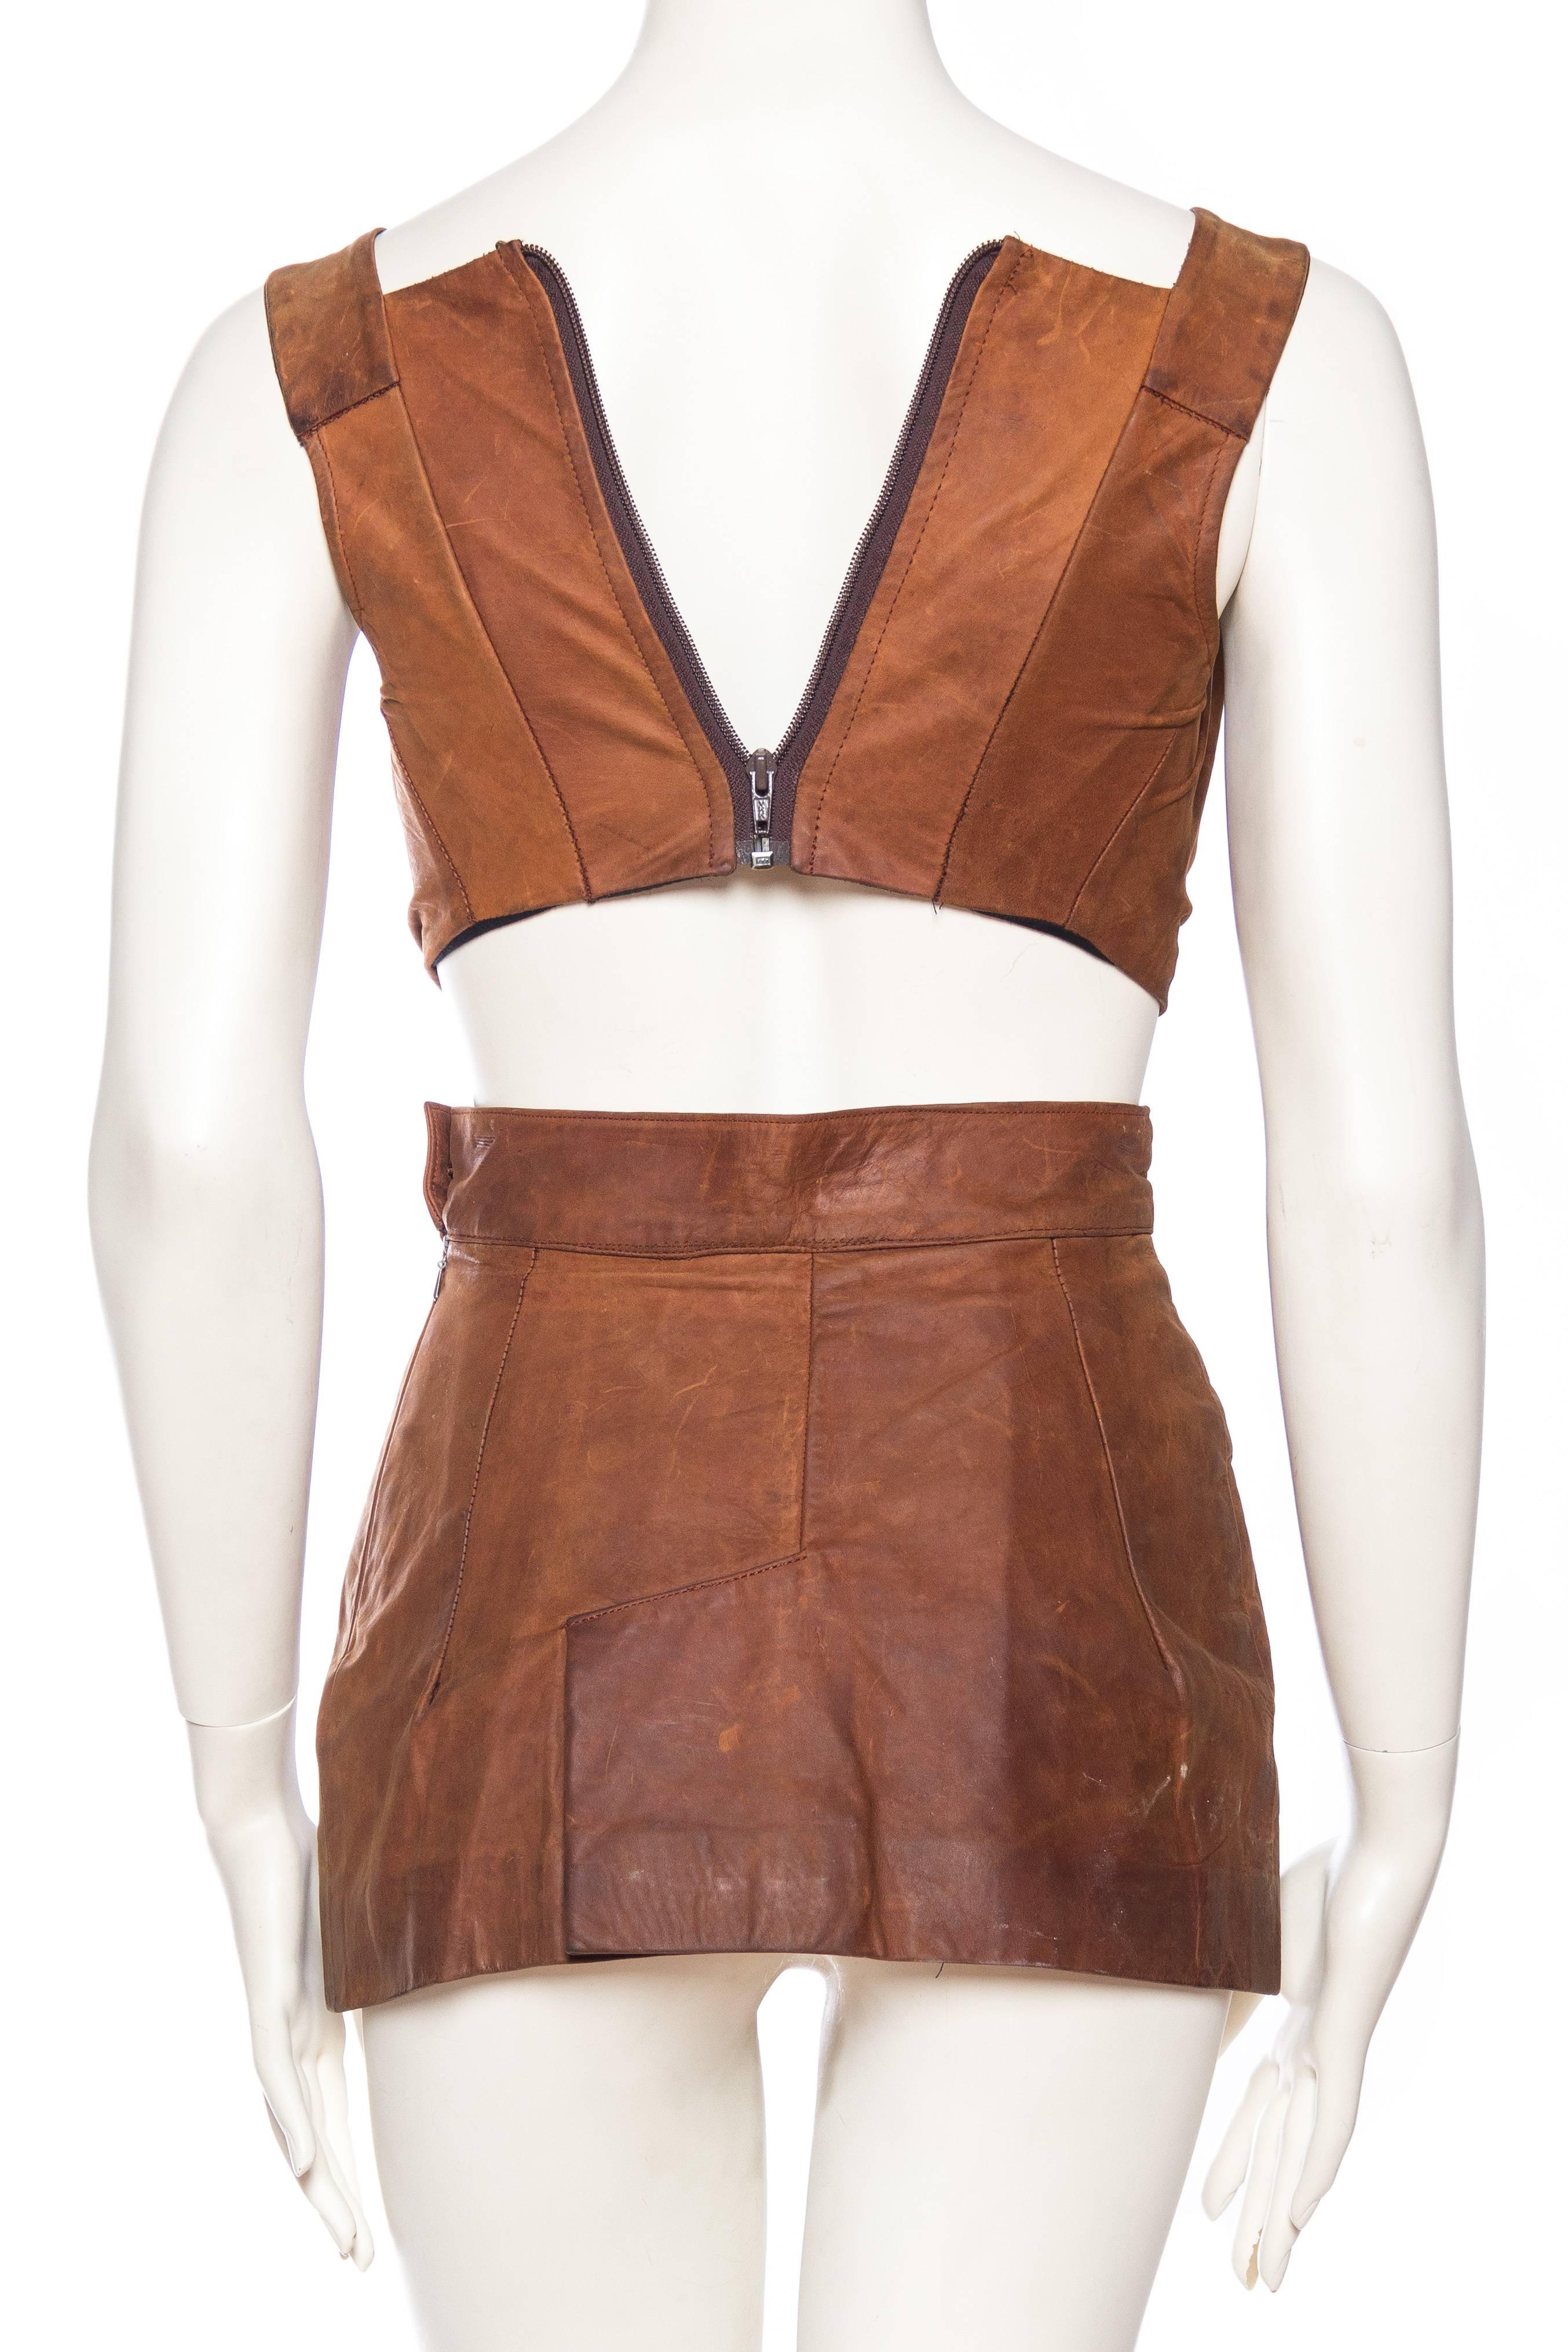 Women's Vivienne Westwood Leather Corset Top and Skirt, 1990s 